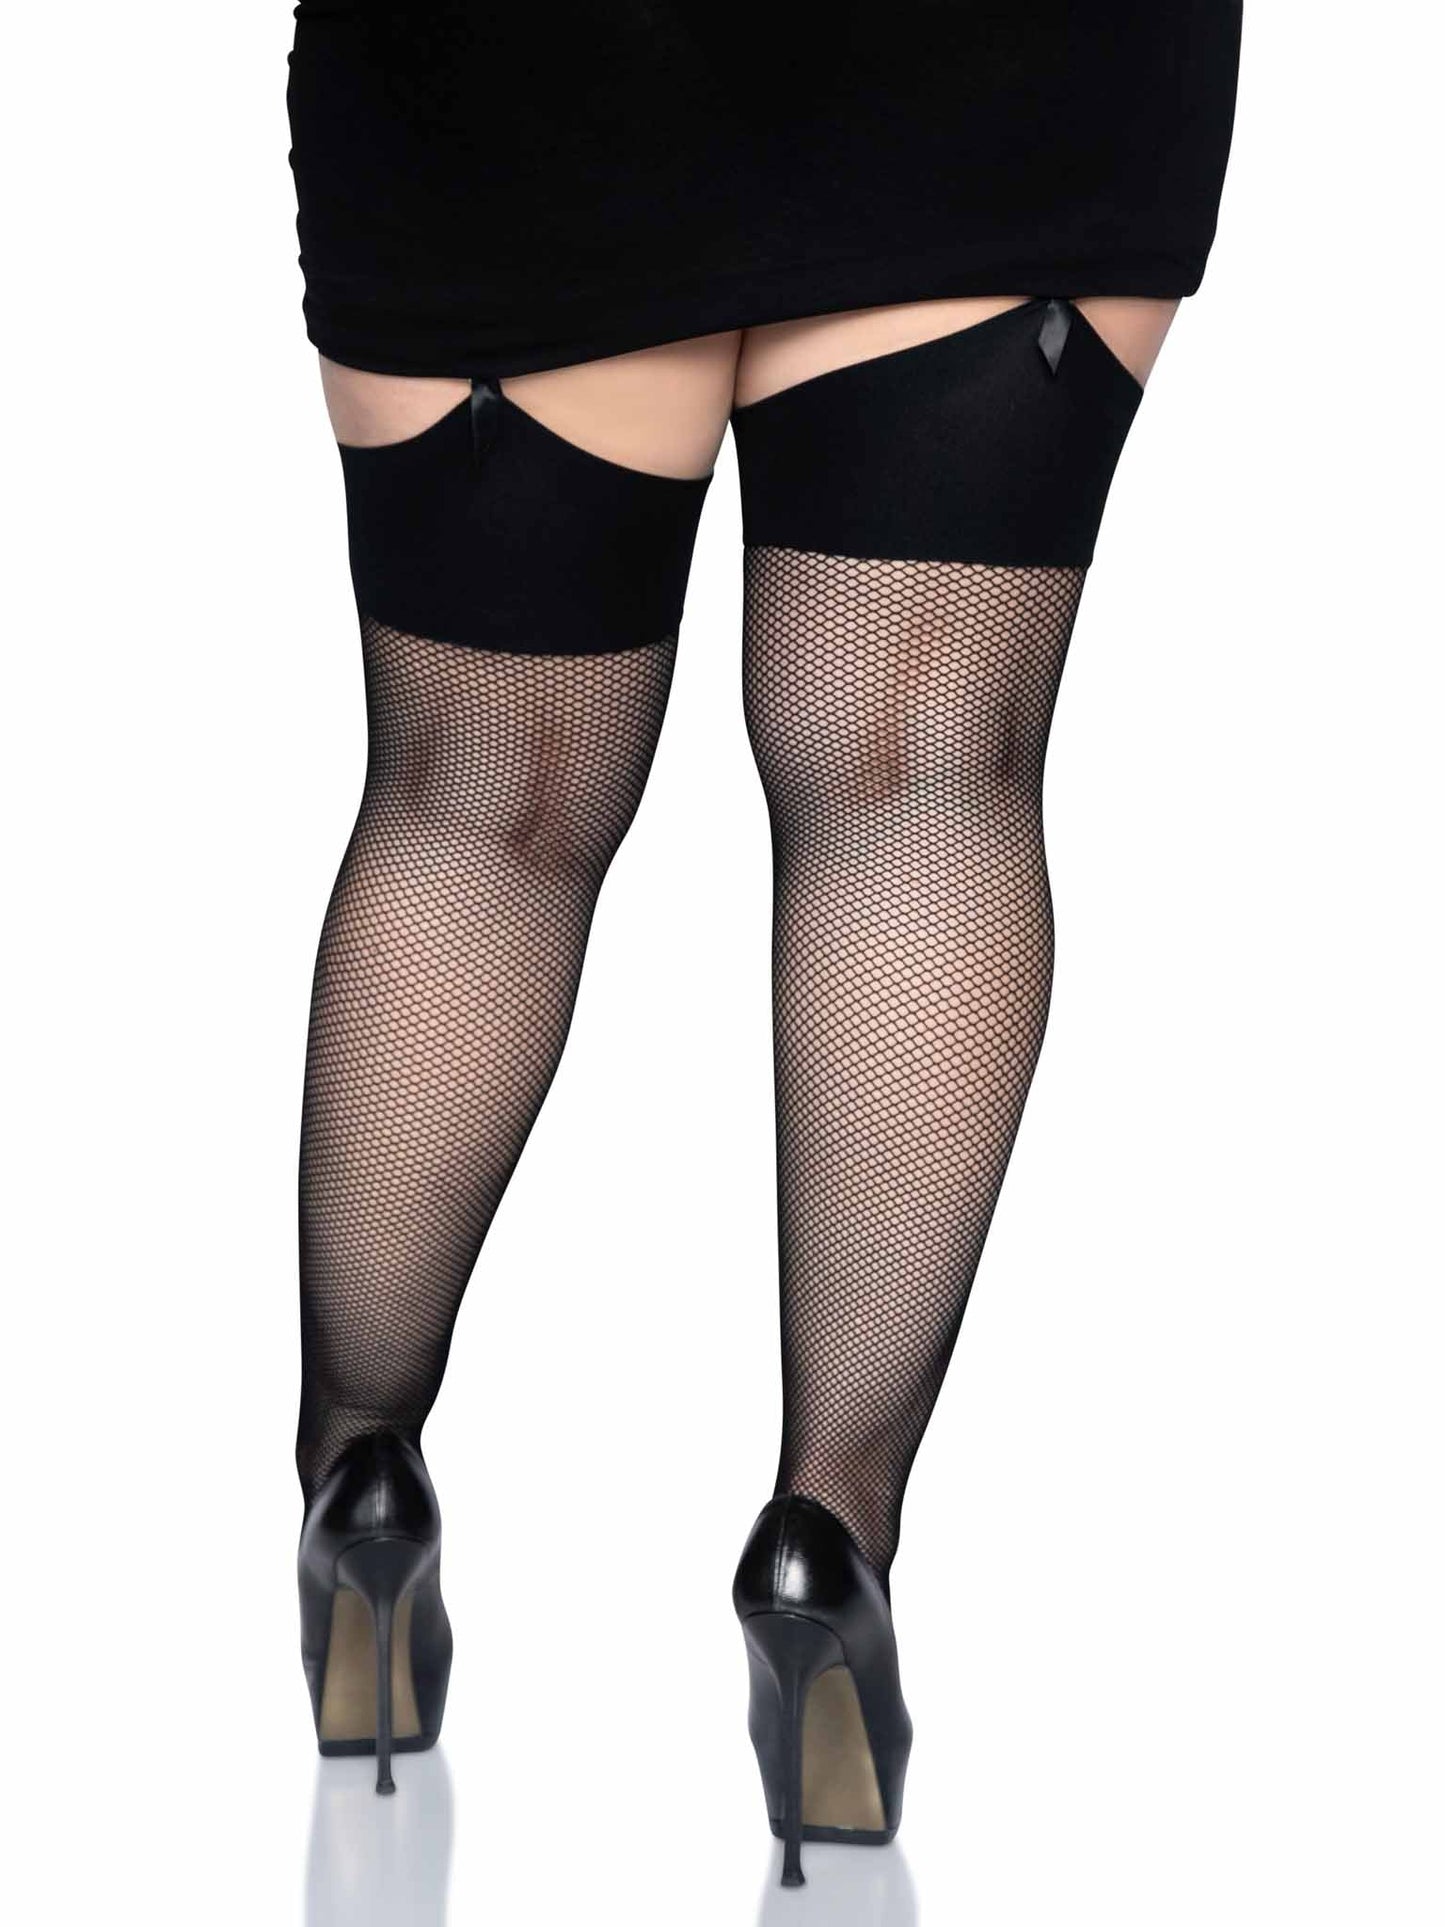 Plus Size Lucy Fishnet Thigh High Stockings